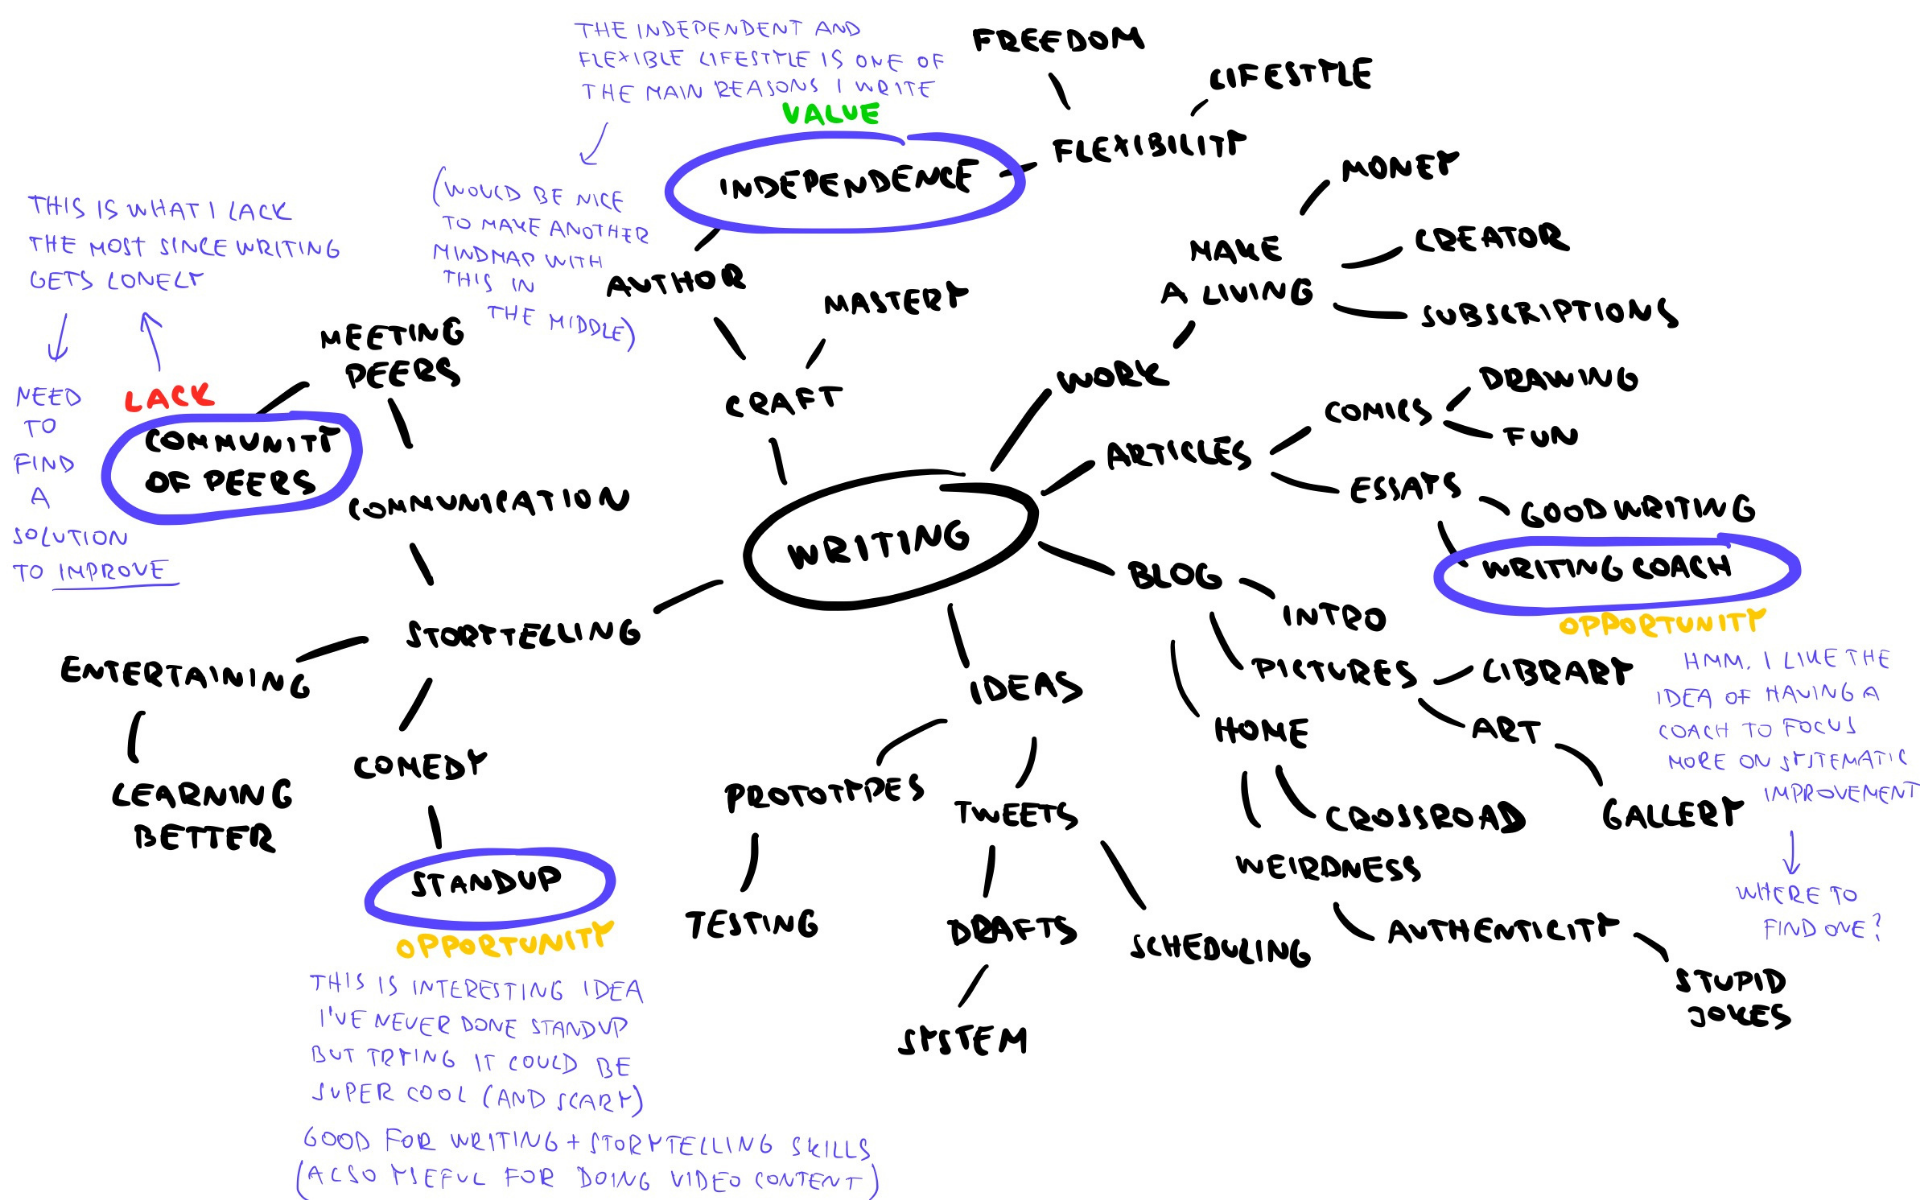 My finished mindmap with a few top ideas.